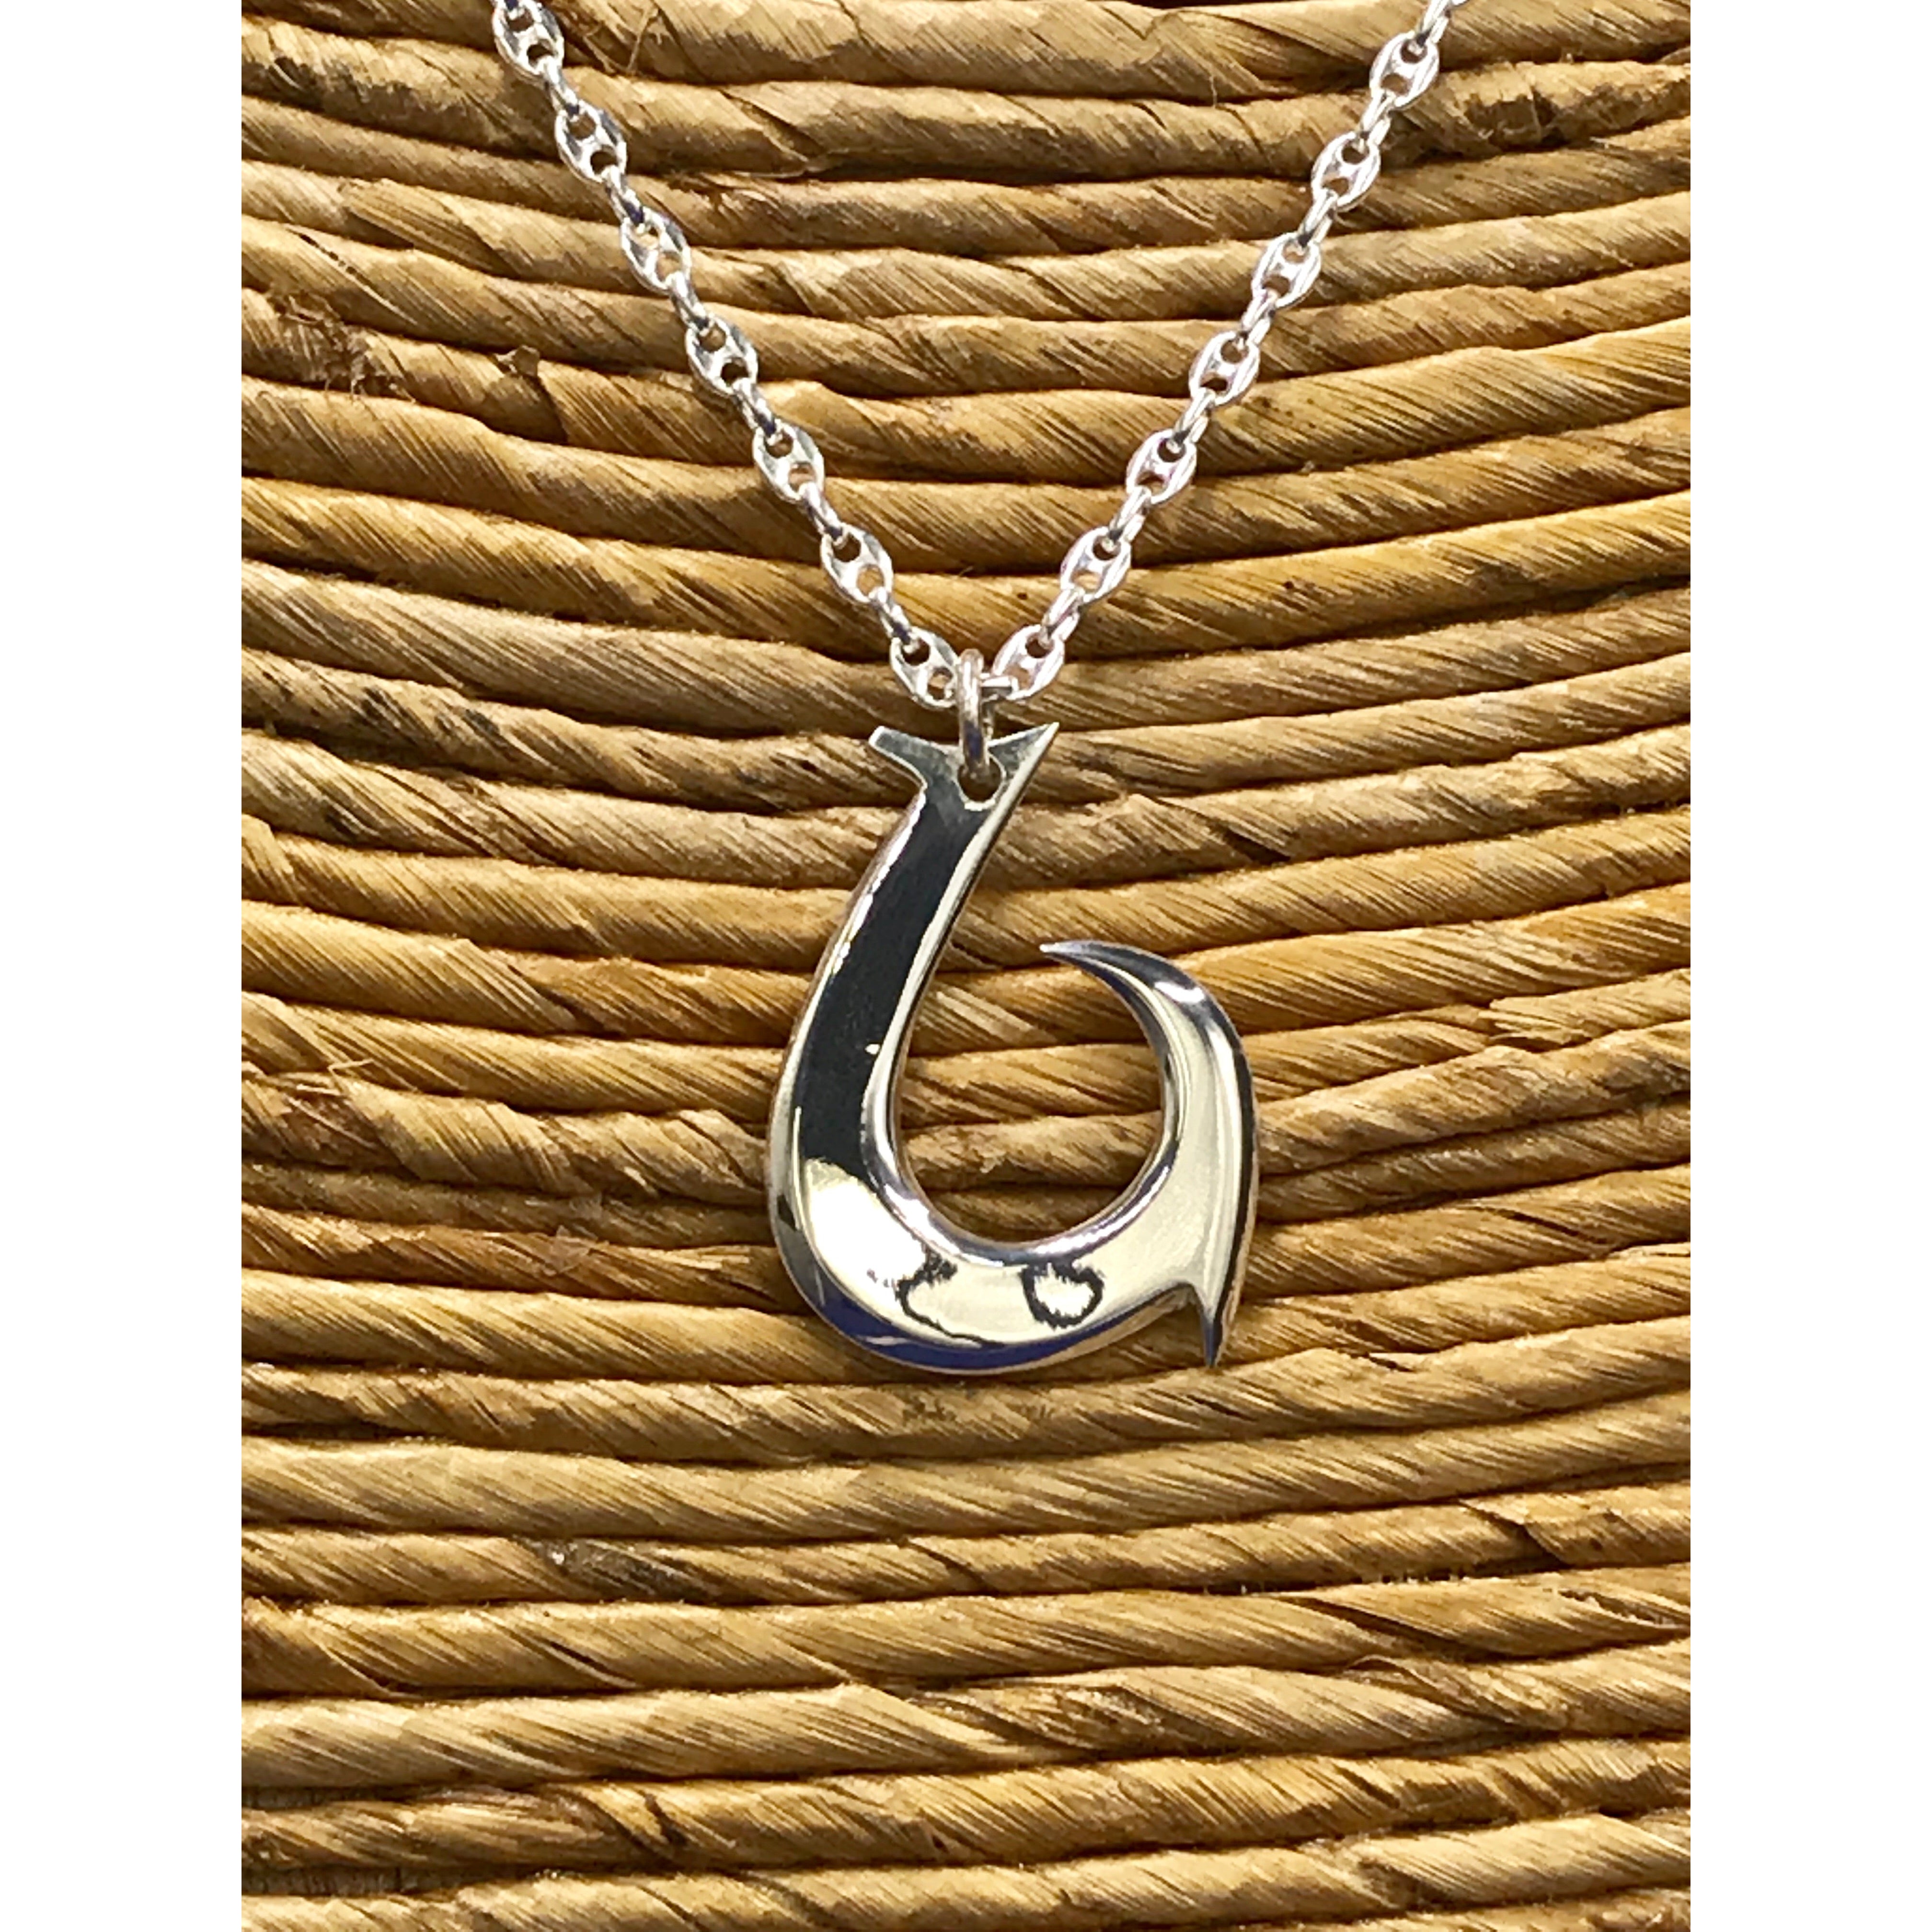 Silver Fish Hook With Heart Necklace 925 Fish Hook With Heart